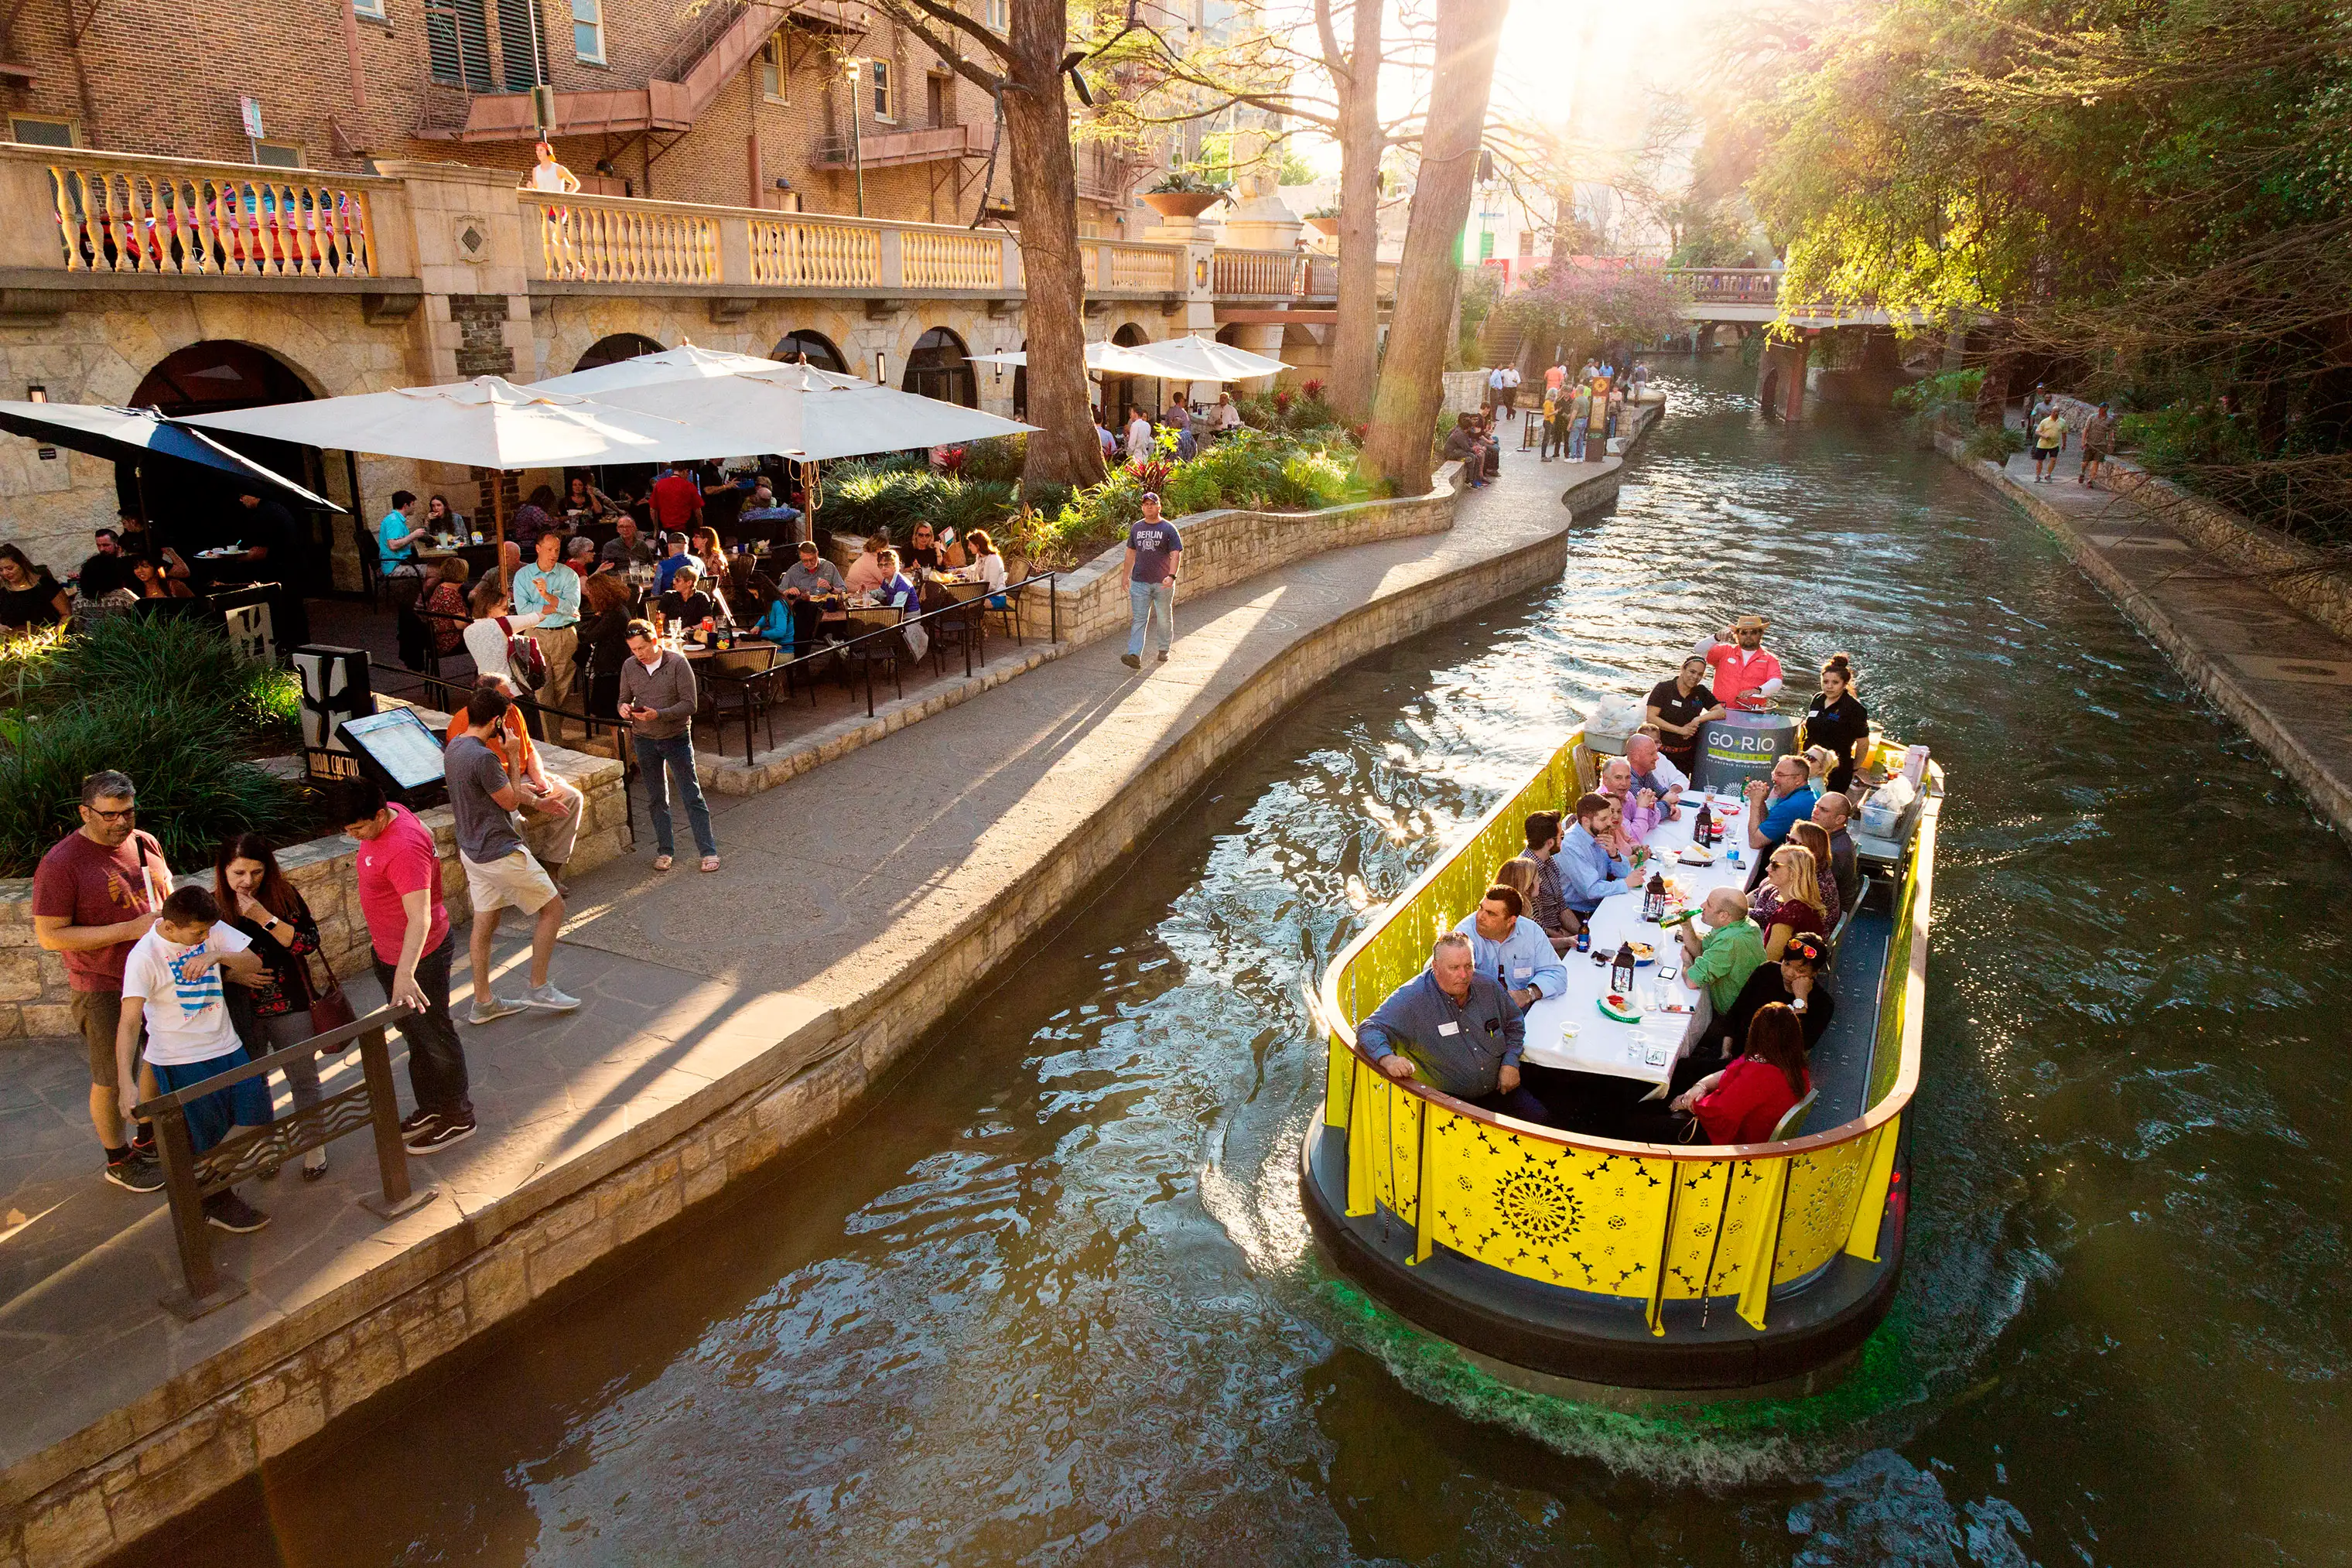 Travelers can dine on a barge and enjoy the San Antonio River Walk